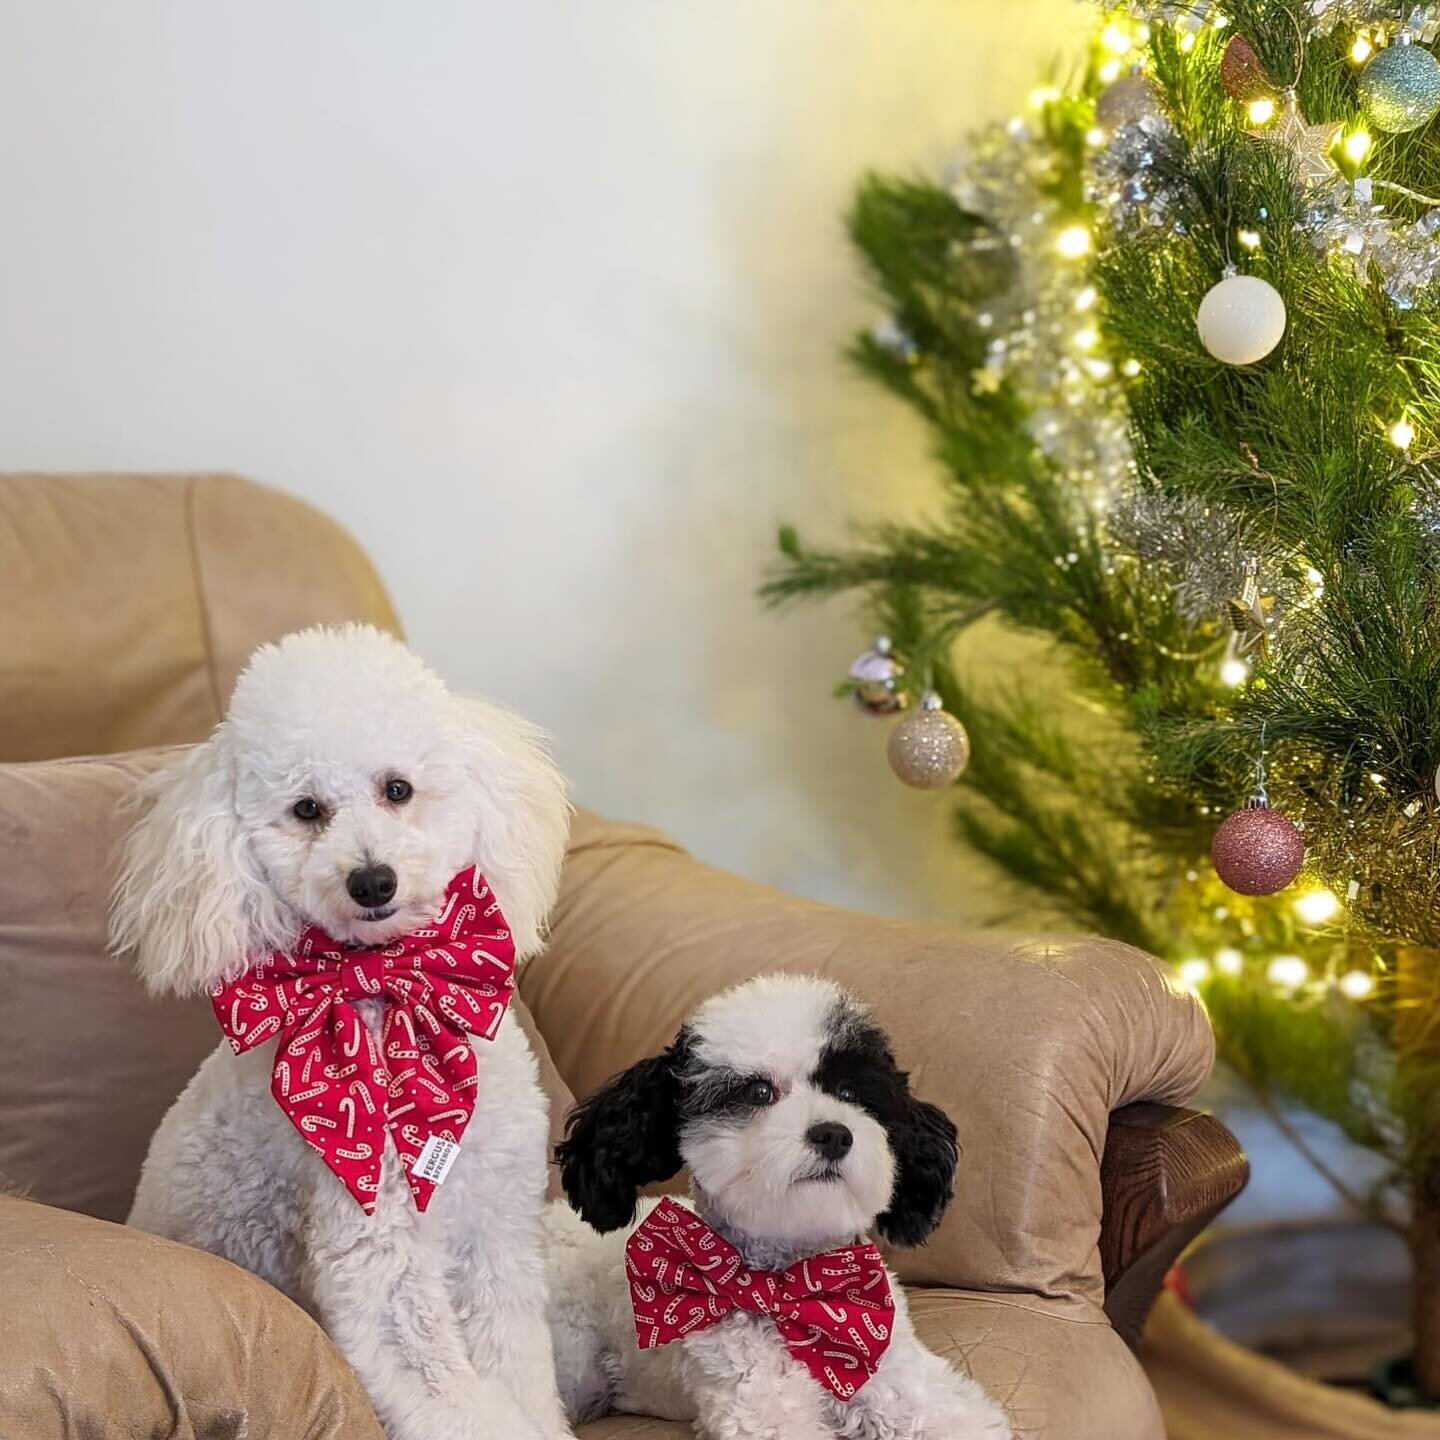 Merry Christmas !🎄 ✨⭐️❤️ These cheeky monkeys are looking cute in their @fergusandfriendsco bow / bow ties 🫶🏻

#gandtessentials #dailyfluff #dogolove #cuties #christmasday #happydoghappylife